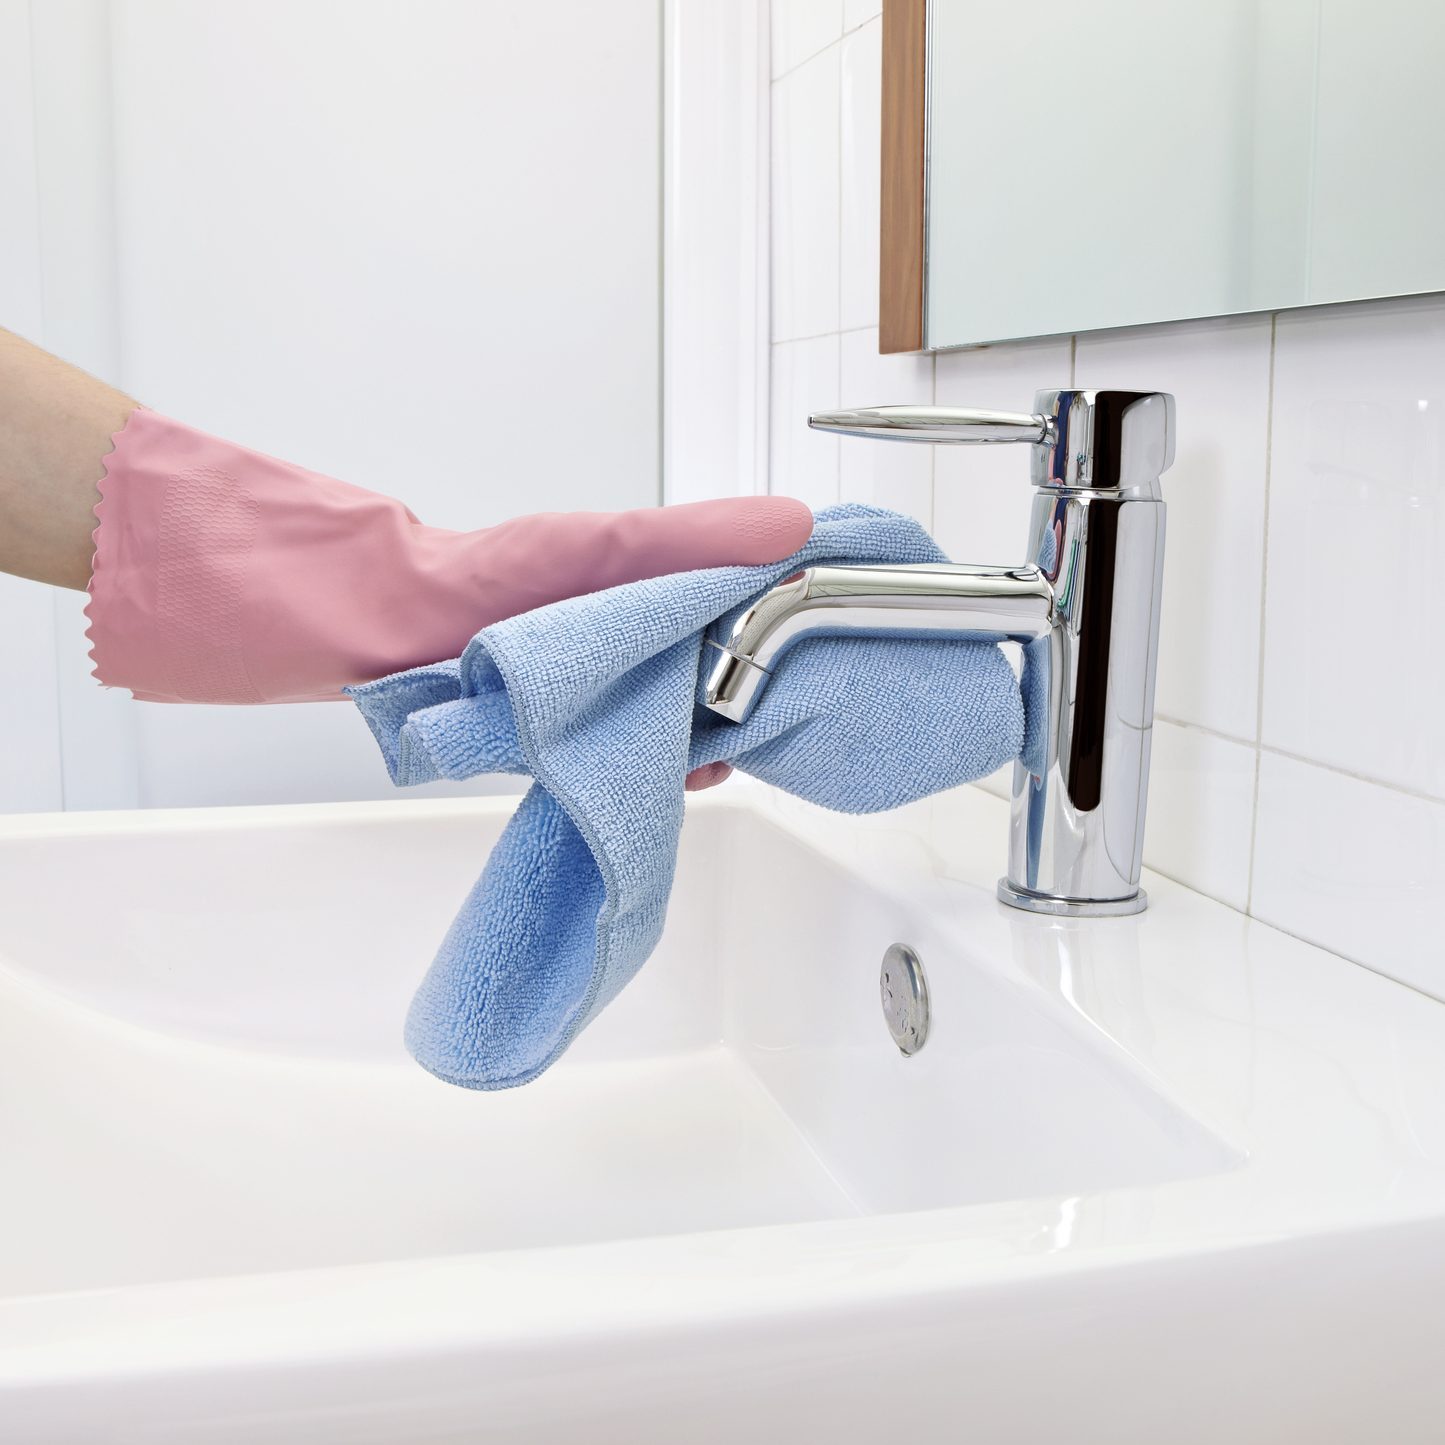 Can You Wash Cleaning Towels and Rags With Clothes?